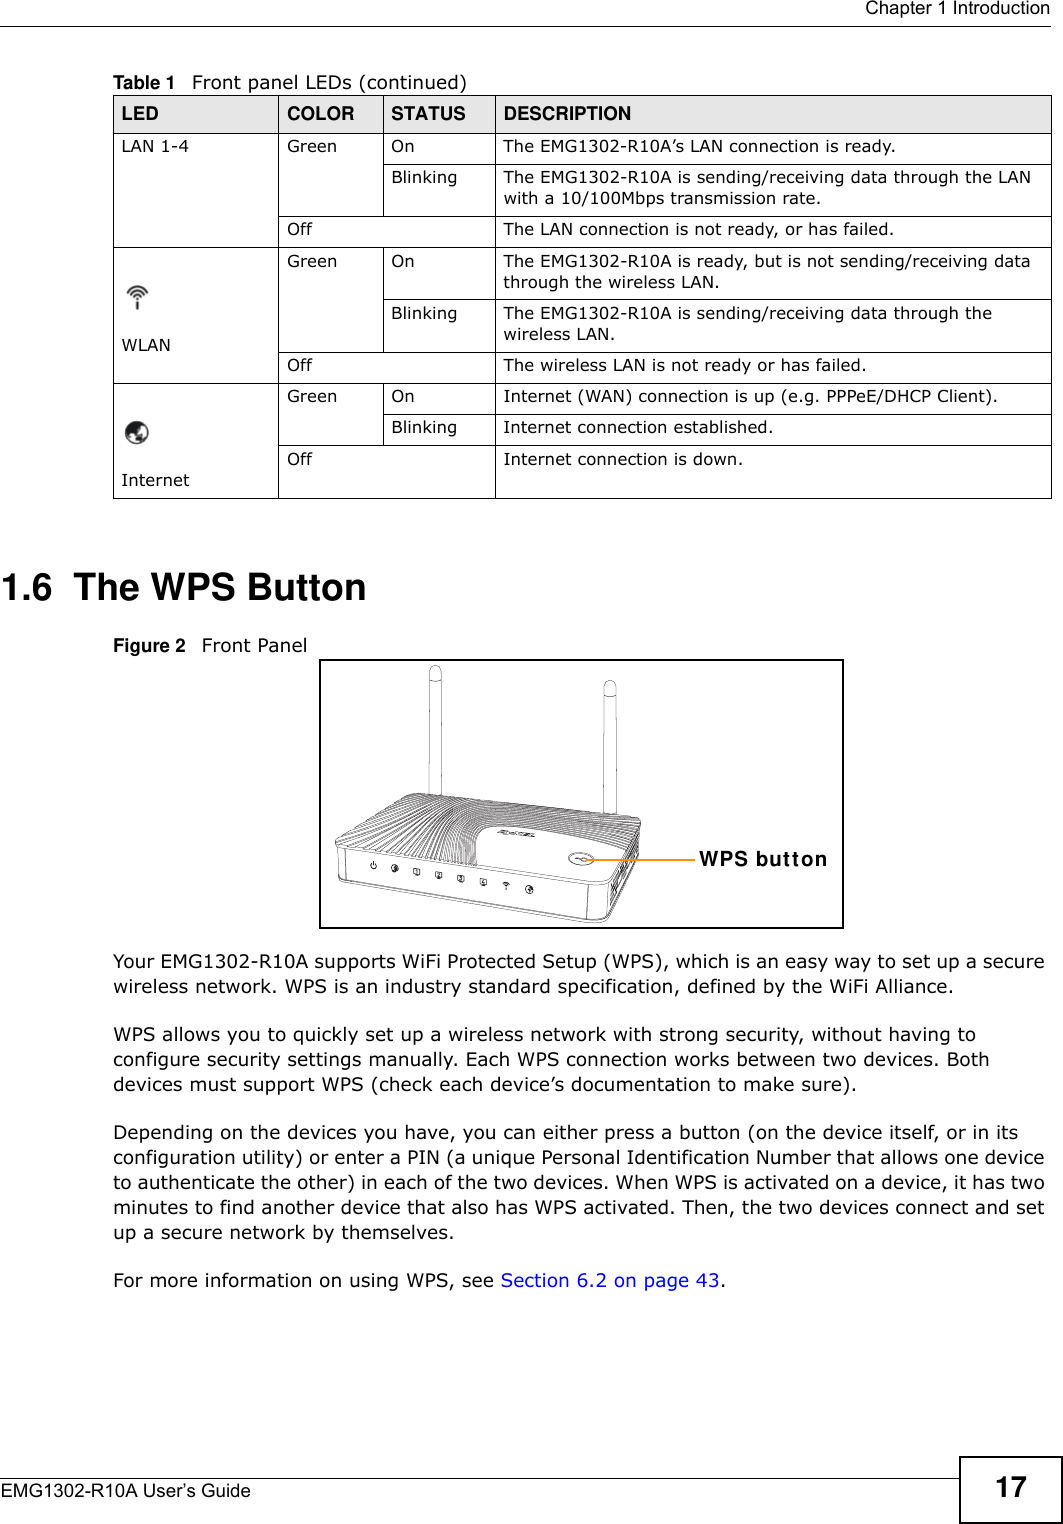  Chapter 1 IntroductionEMG1302-R10A User’s Guide 171.6  The WPS ButtonFigure 2   Front PanelYour EMG1302-R10A supports WiFi Protected Setup (WPS), which is an easy way to set up a secure wireless network. WPS is an industry standard specification, defined by the WiFi Alliance.WPS allows you to quickly set up a wireless network with strong security, without having to configure security settings manually. Each WPS connection works between two devices. Both devices must support WPS (check each device’s documentation to make sure). Depending on the devices you have, you can either press a button (on the device itself, or in its configuration utility) or enter a PIN (a unique Personal Identification Number that allows one device to authenticate the other) in each of the two devices. When WPS is activated on a device, it has two minutes to find another device that also has WPS activated. Then, the two devices connect and set up a secure network by themselves.For more information on using WPS, see Section 6.2 on page 43.LAN 1-4 Green On The EMG1302-R10A’s LAN connection is ready. Blinking The EMG1302-R10A is sending/receiving data through the LAN with a 10/100Mbps transmission rate.Off The LAN connection is not ready, or has failed.WLANGreen On The EMG1302-R10A is ready, but is not sending/receiving data through the wireless LAN. Blinking The EMG1302-R10A is sending/receiving data through the wireless LAN.Off The wireless LAN is not ready or has failed.InternetGreen On Internet (WAN) connection is up (e.g. PPPeE/DHCP Client).Blinking Internet connection established.Off Internet connection is down.Table 1   Front panel LEDs (continued)LED COLOR STATUS DESCRIPTIONWPS but t on